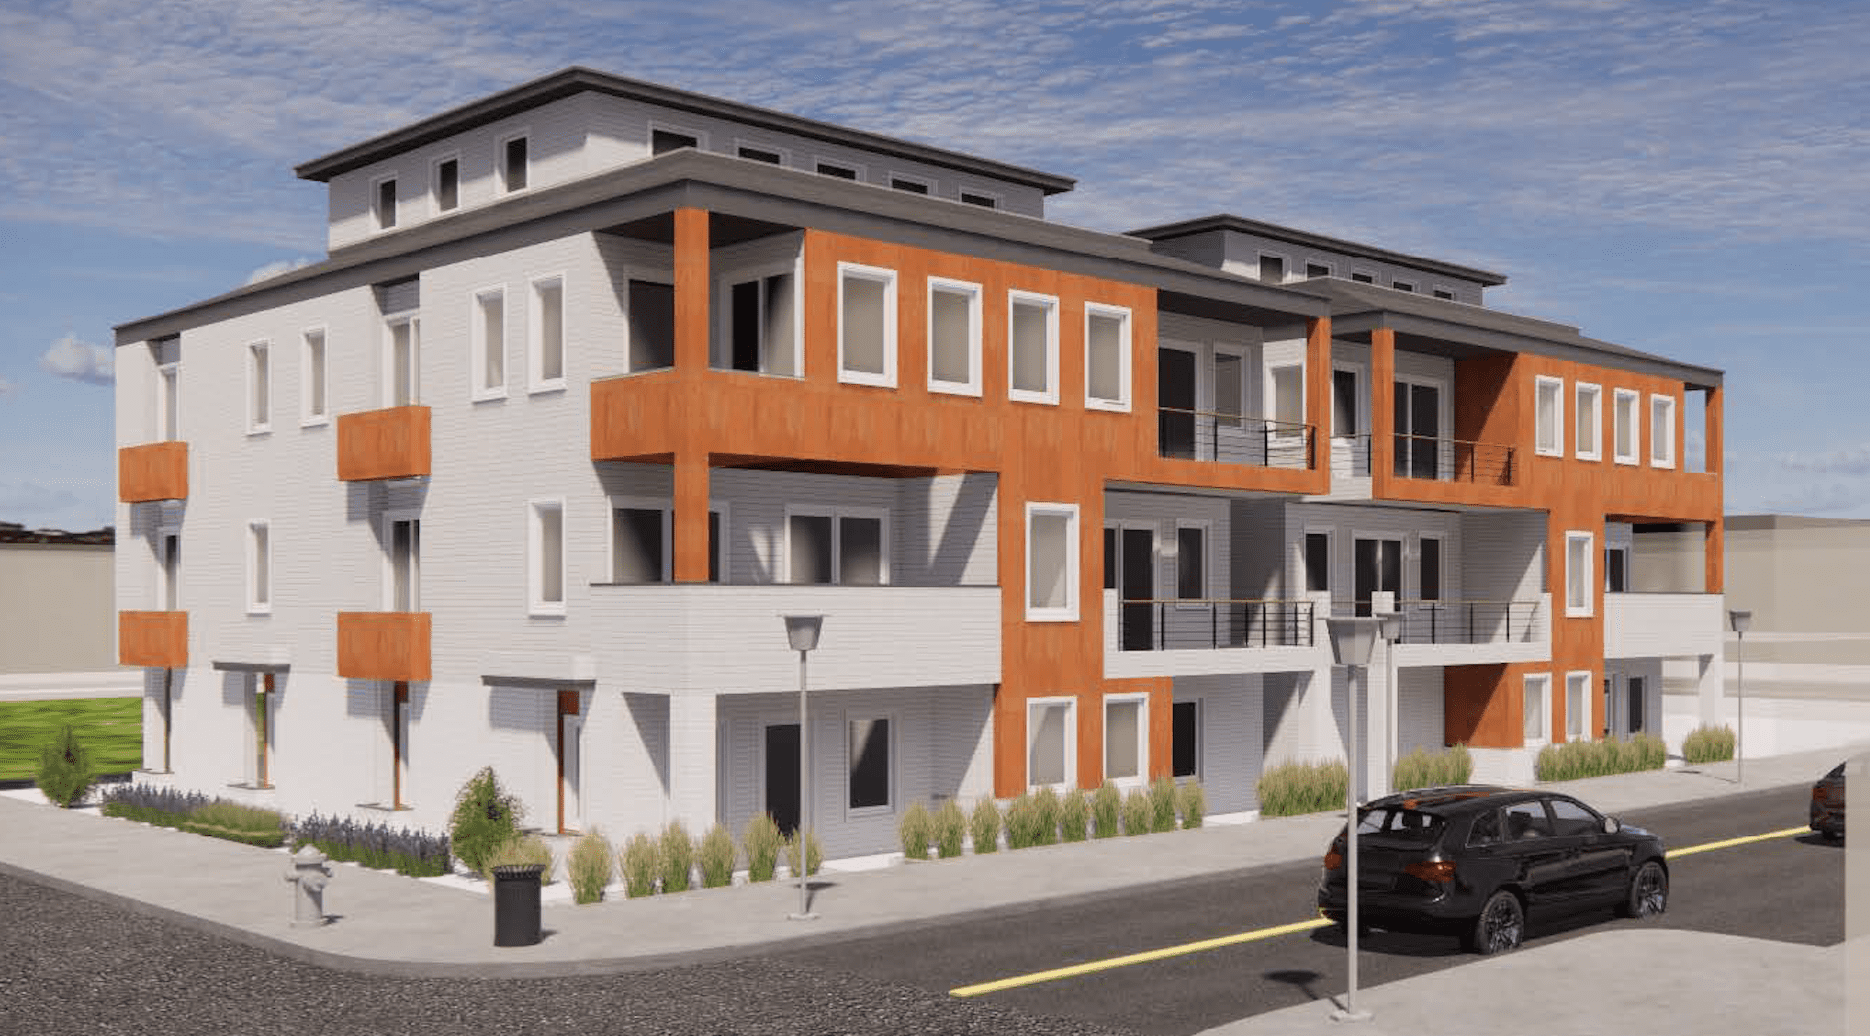 New Condos Coming To Pacific Ave in Wildwood